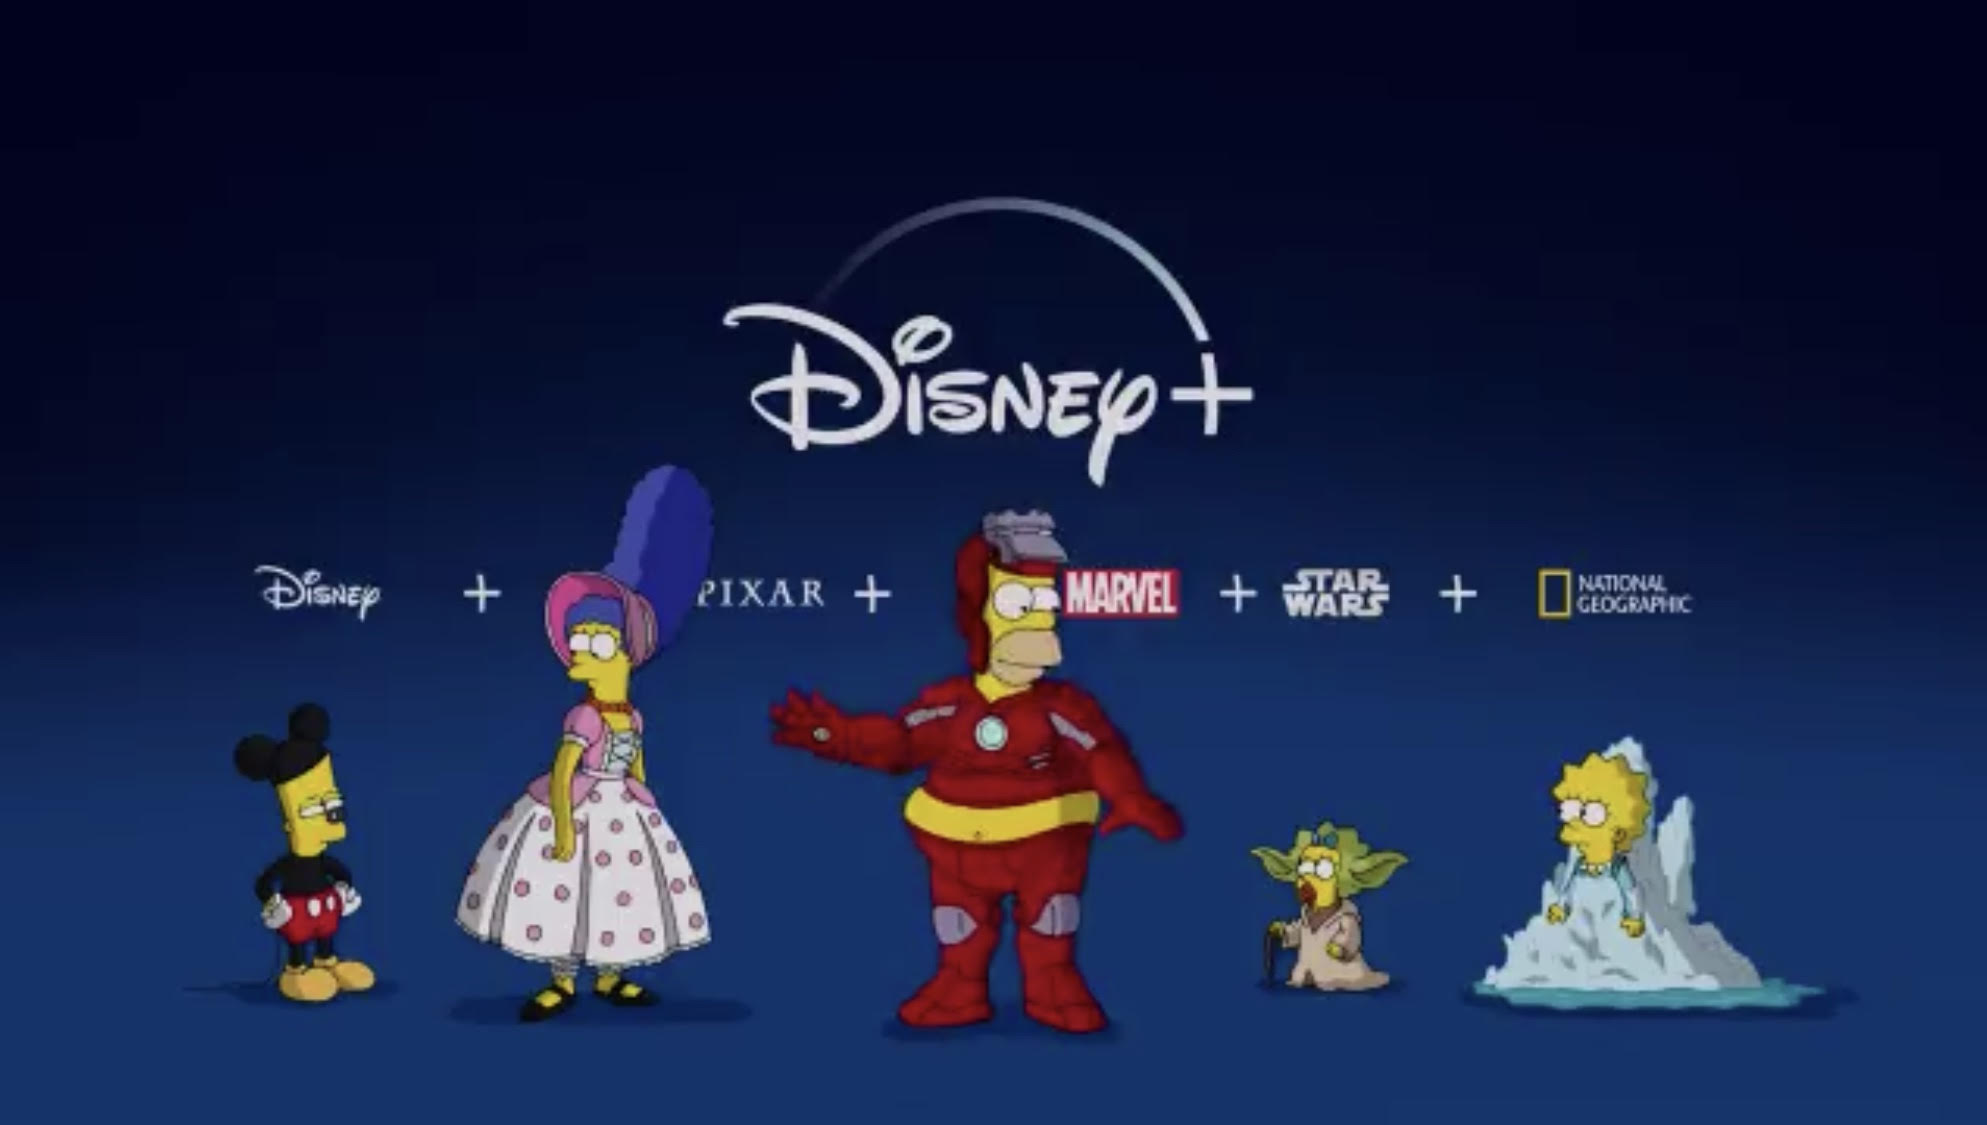 ‘The Simpsons’ Join Disney+ In Hilarious New Video